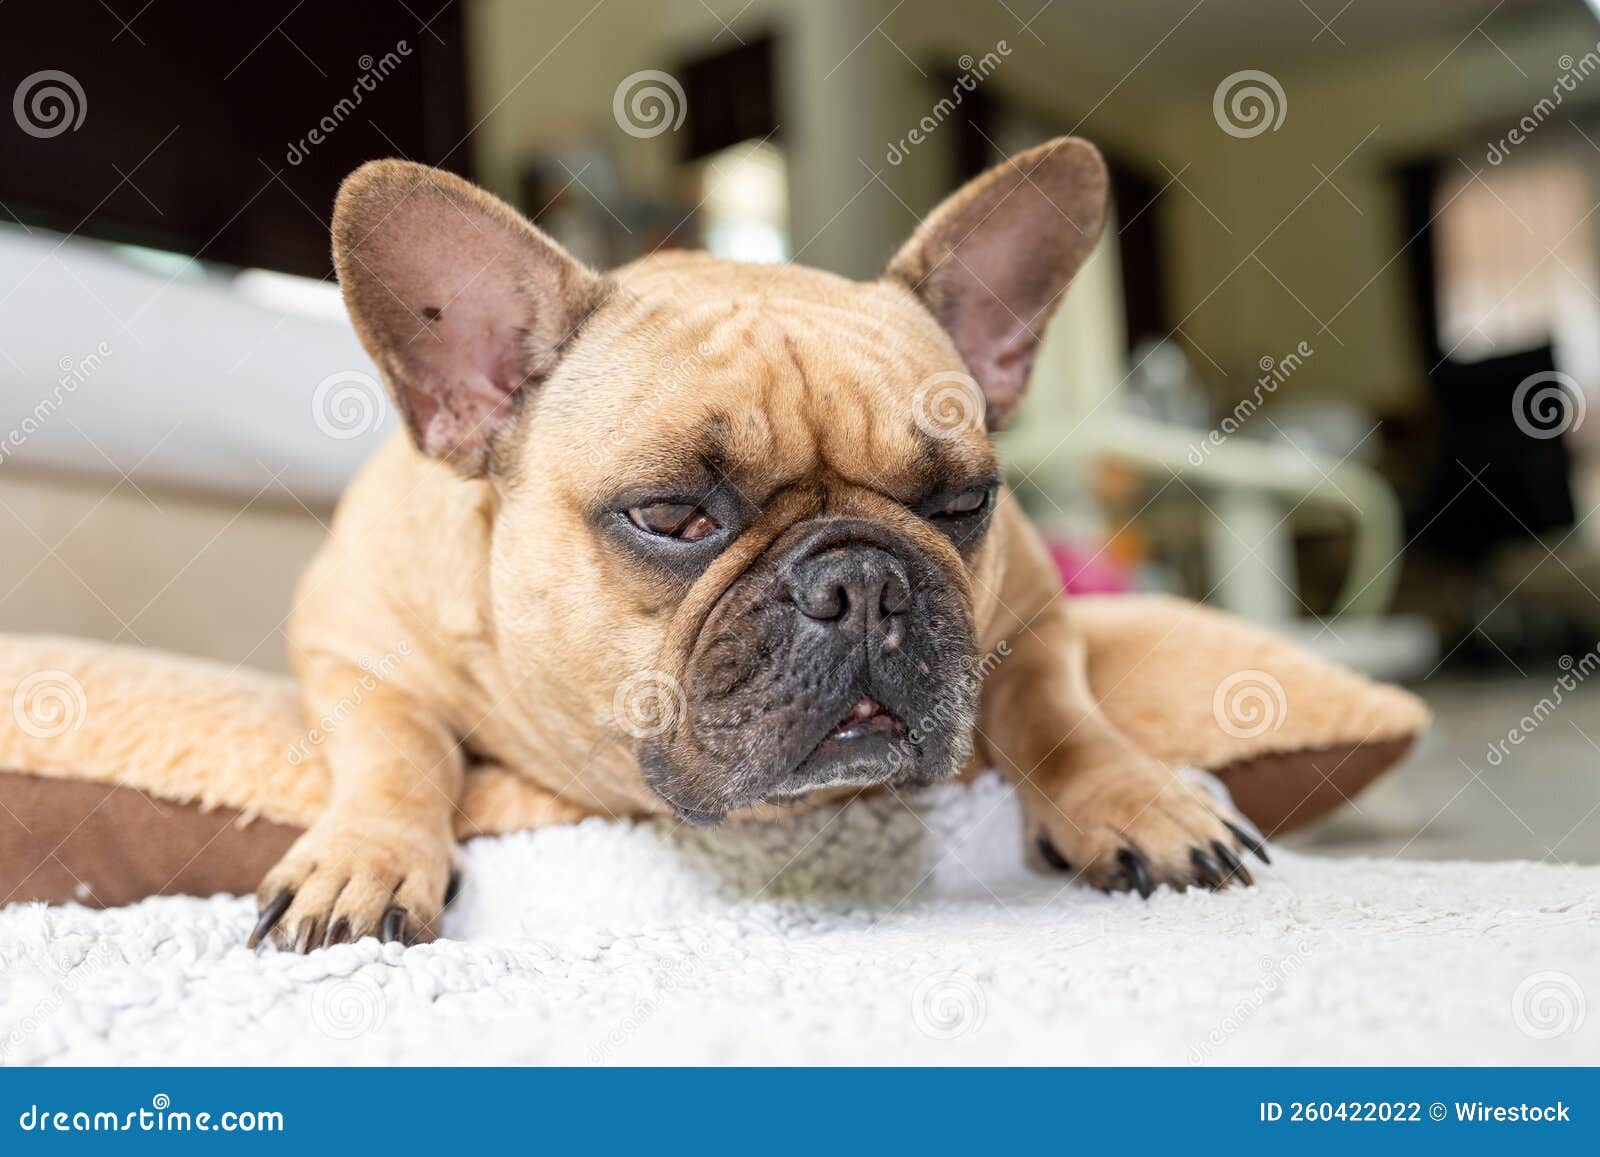 Tired French Bulldog Lying on a Pillow Stock Photo - Image of pillow ...